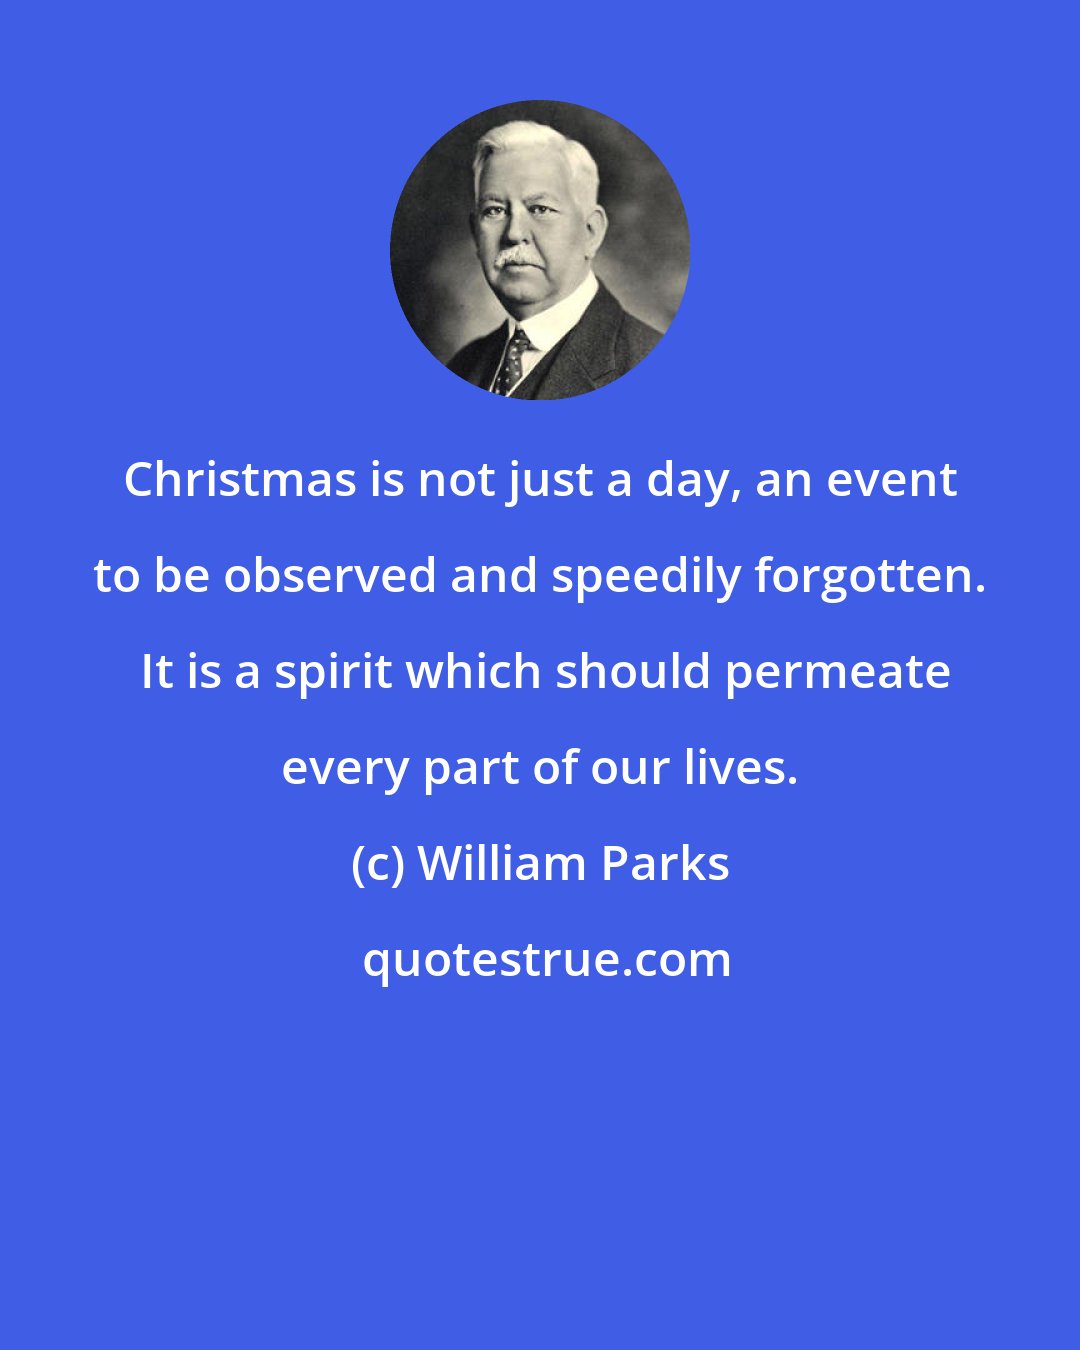 William Parks: Christmas is not just a day, an event to be observed and speedily forgotten.  It is a spirit which should permeate every part of our lives.